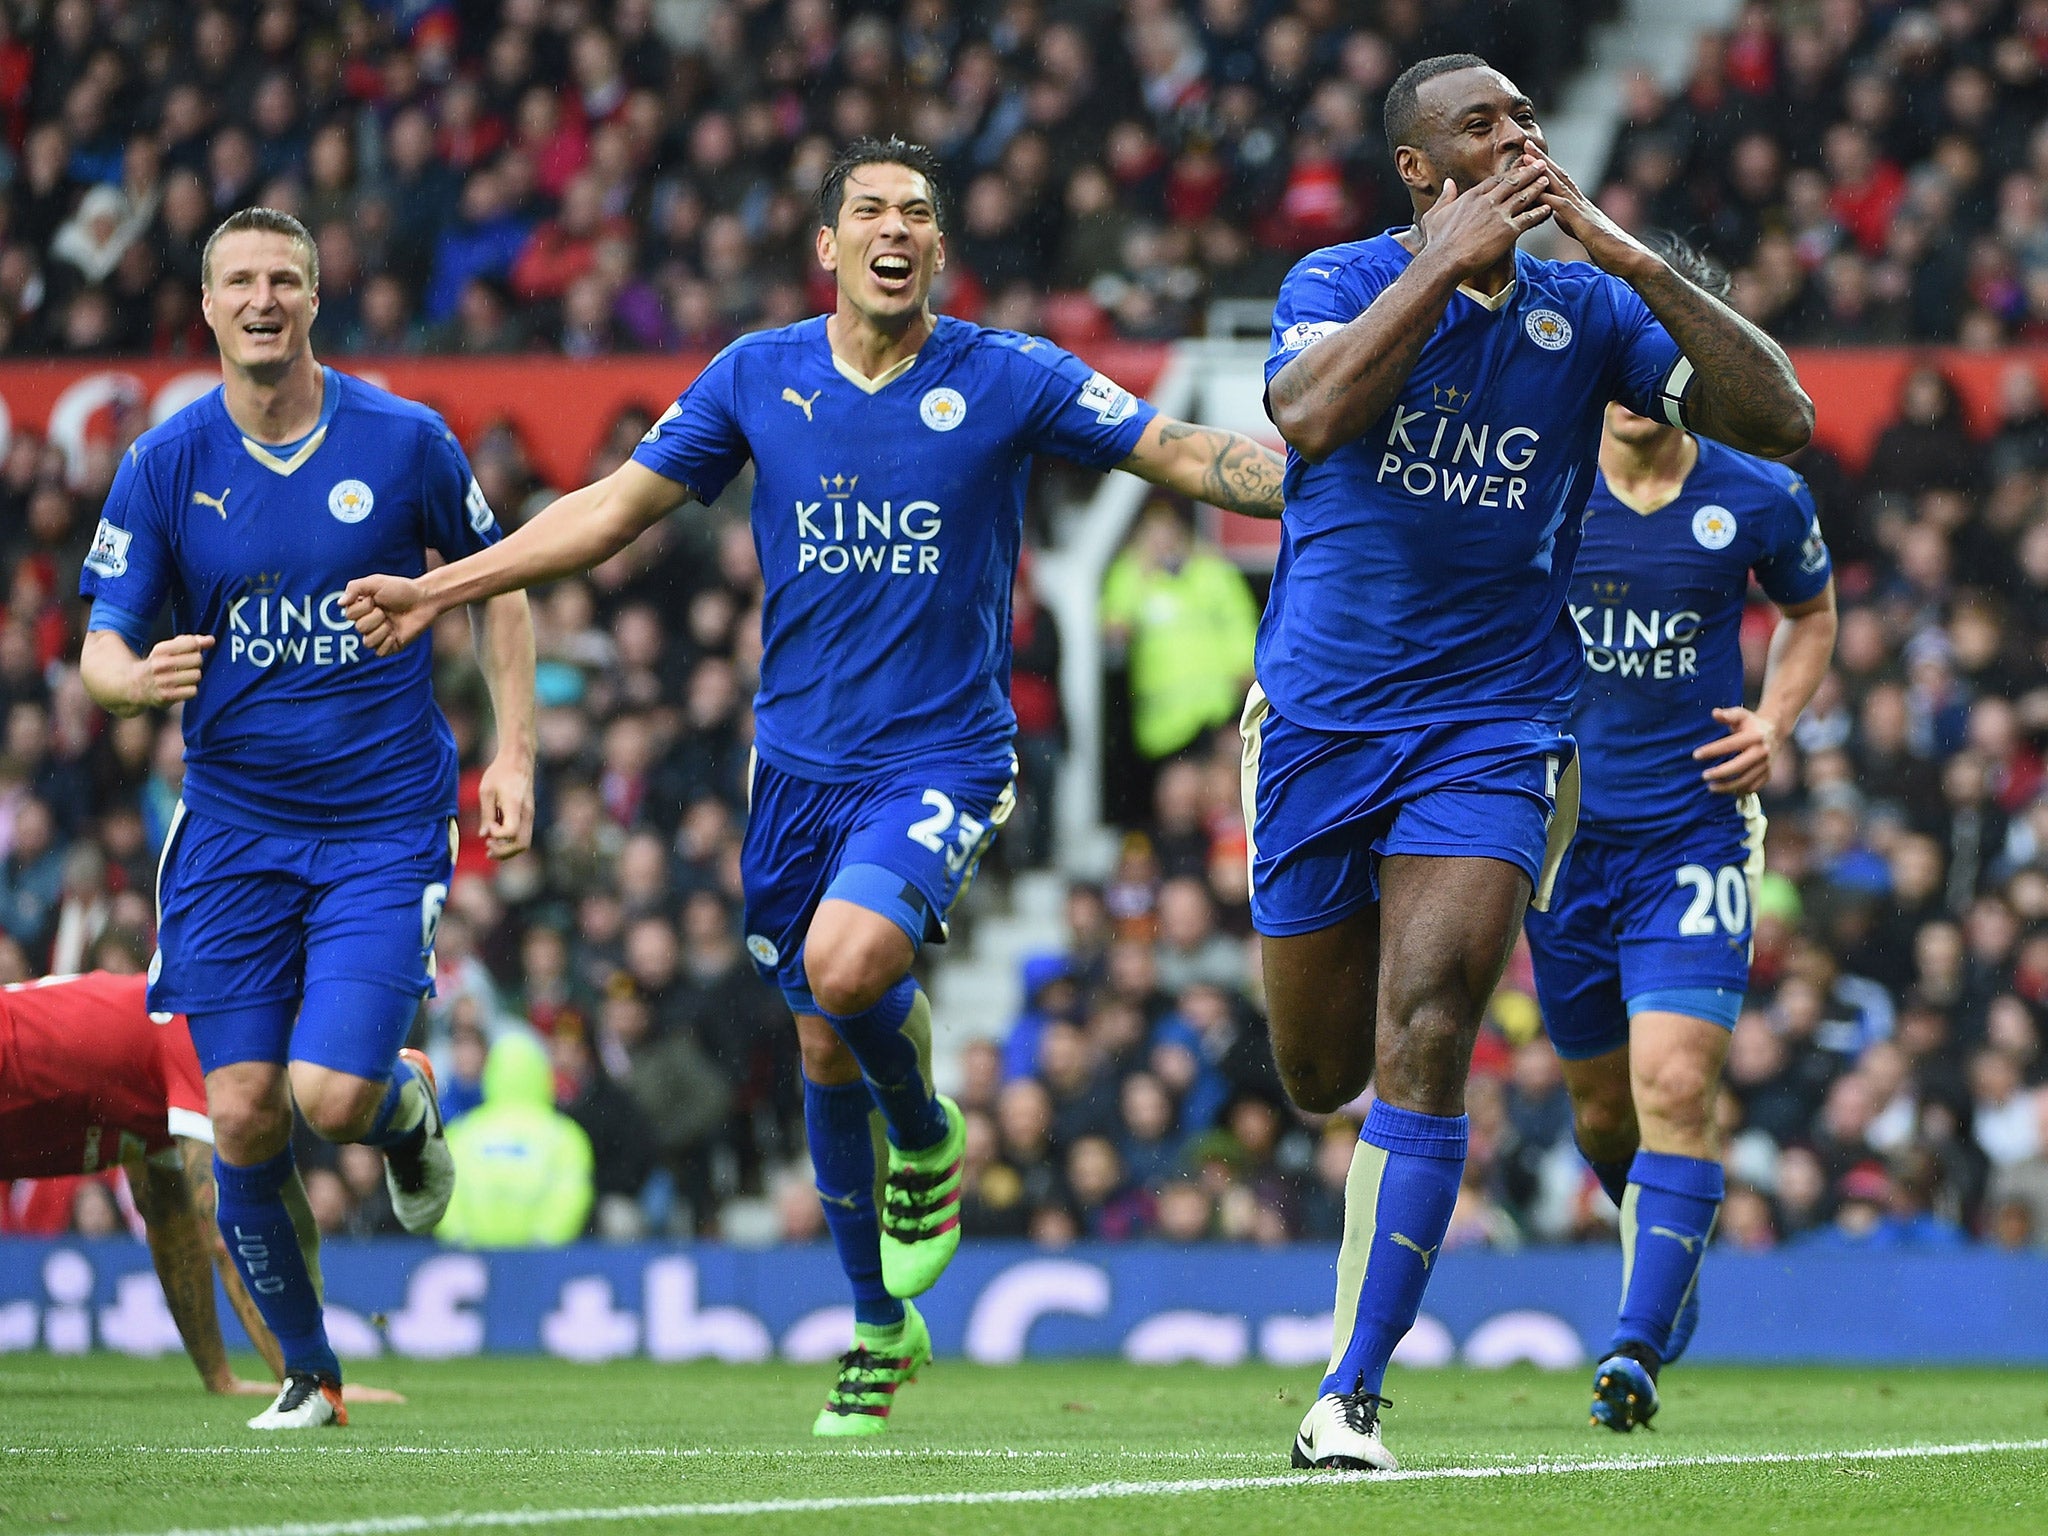 Wes Morgan celebrates scoring the equaliser for Leicester against Manchester United